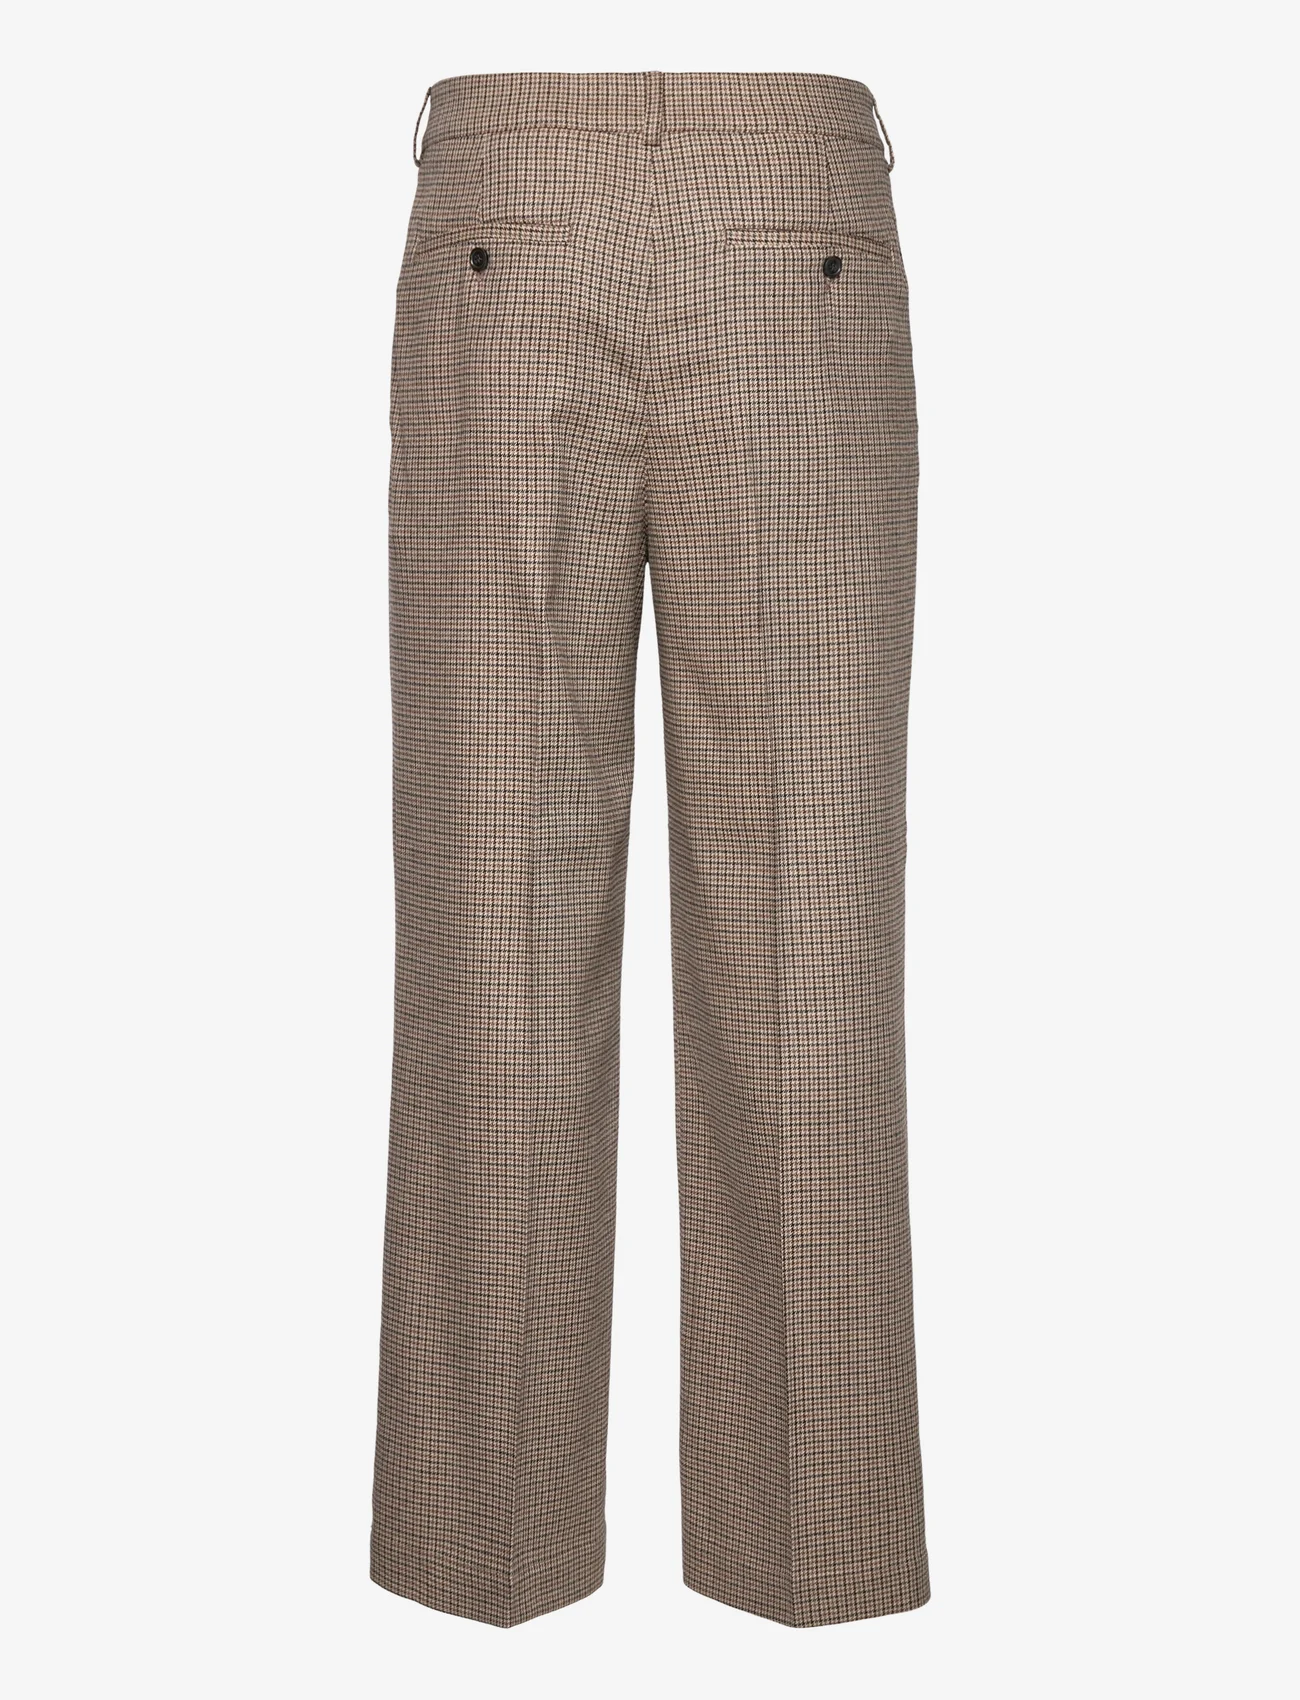 GANT - D2. PLEATED CHECKED SUIT PANT - anzugshosen - dry sand - 1